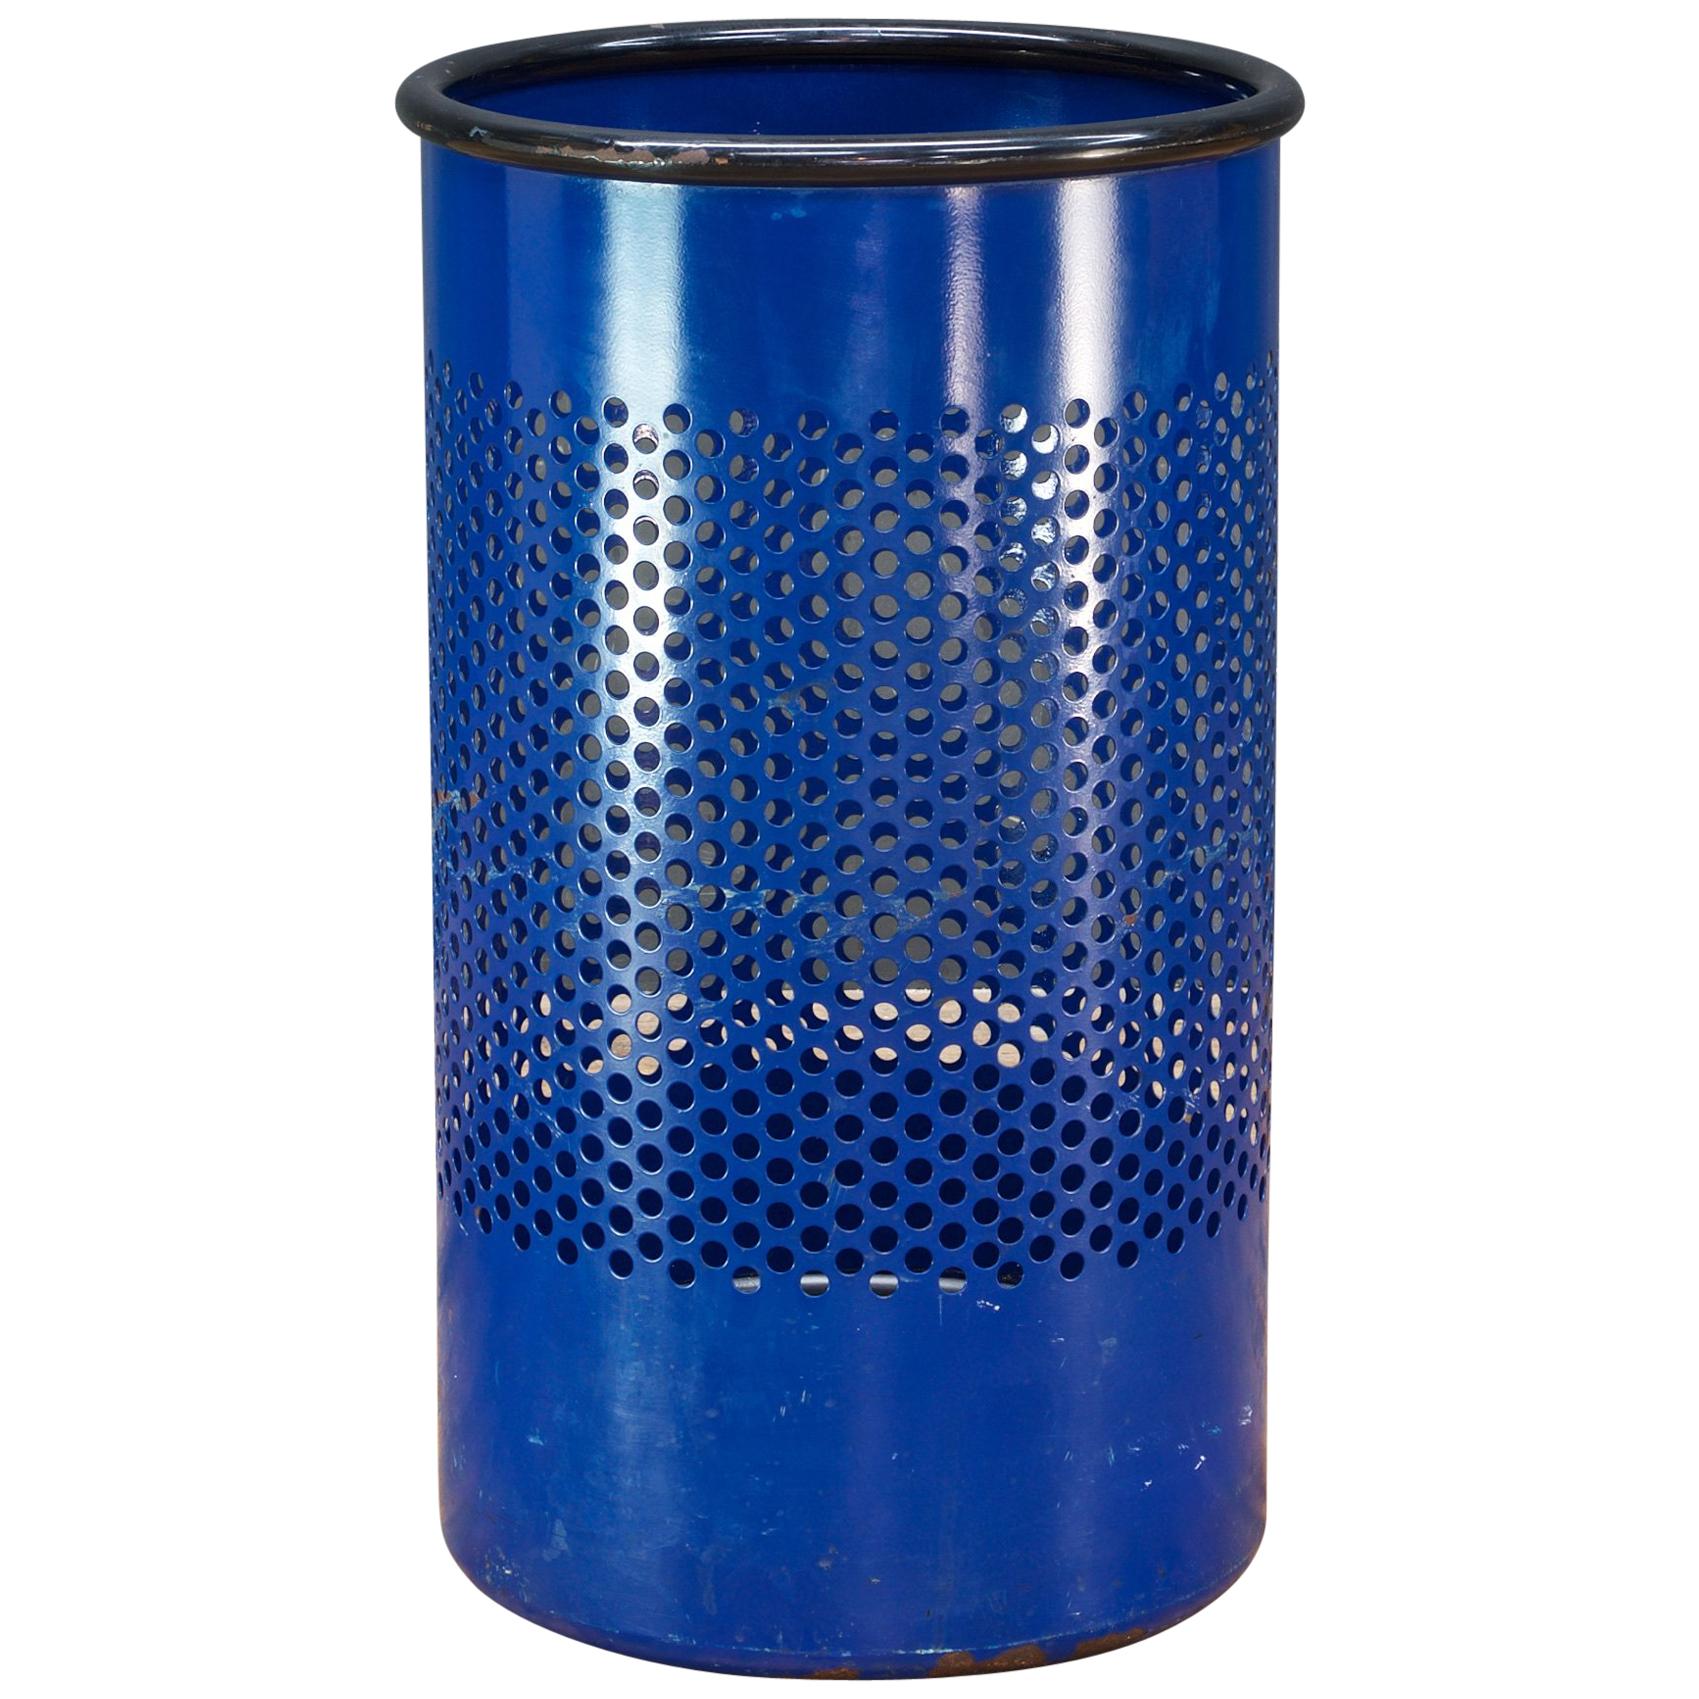 1980s Blue Perforated Metal Office Wastebasket Trash Can Italy Memphis Sottsass